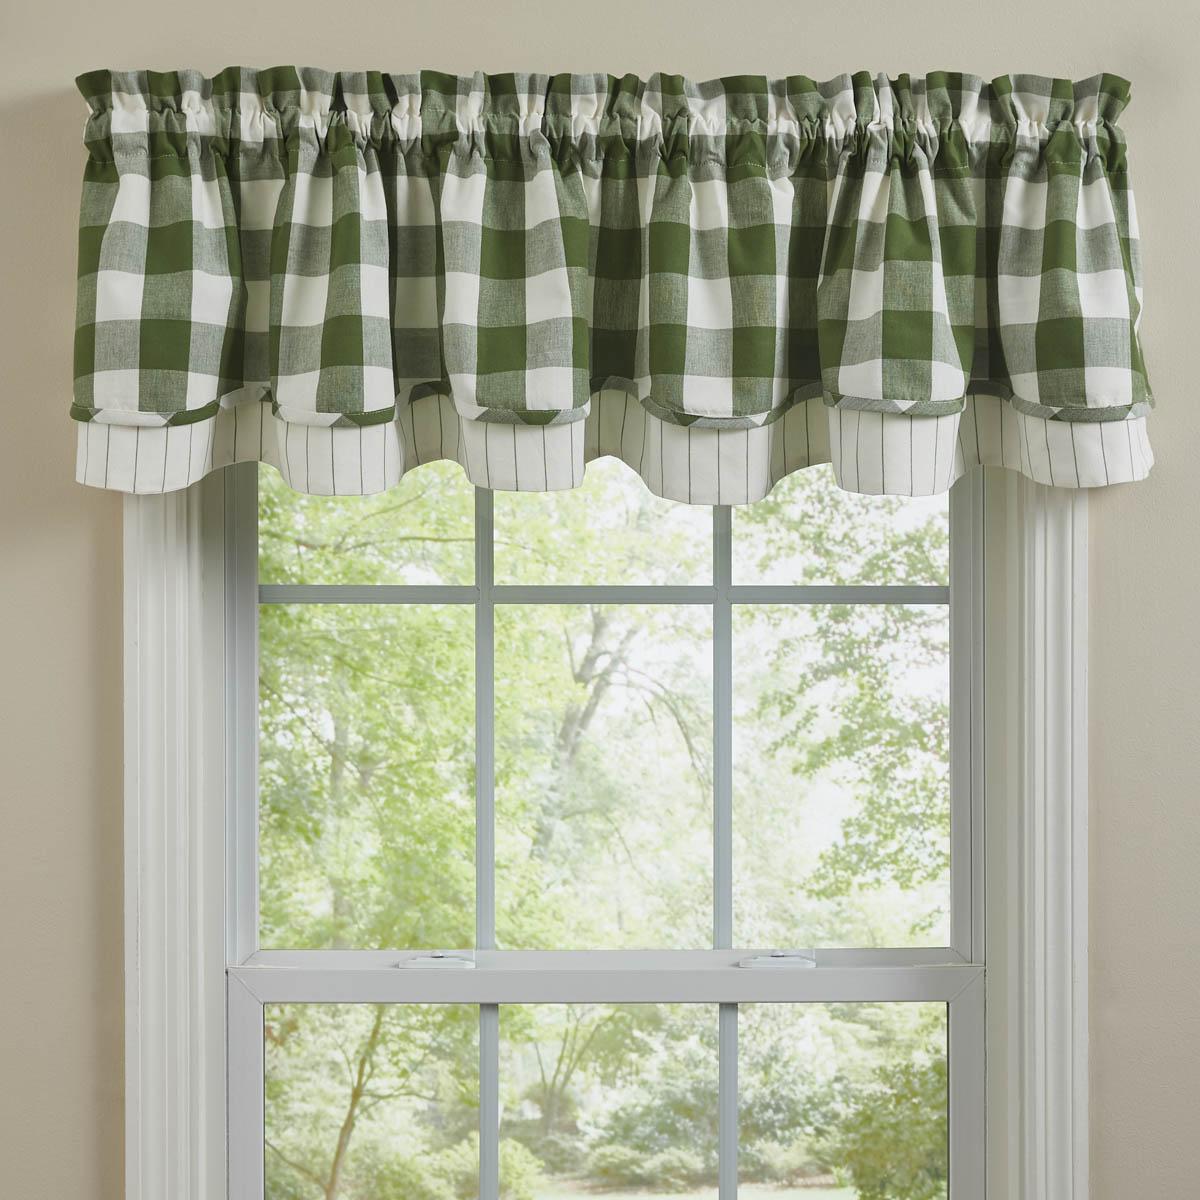 CURTAIN JAMESTOWN VALANCE LINED BORDER RED NAVY GRAY PARK DESIGNS 72X14 closeout 